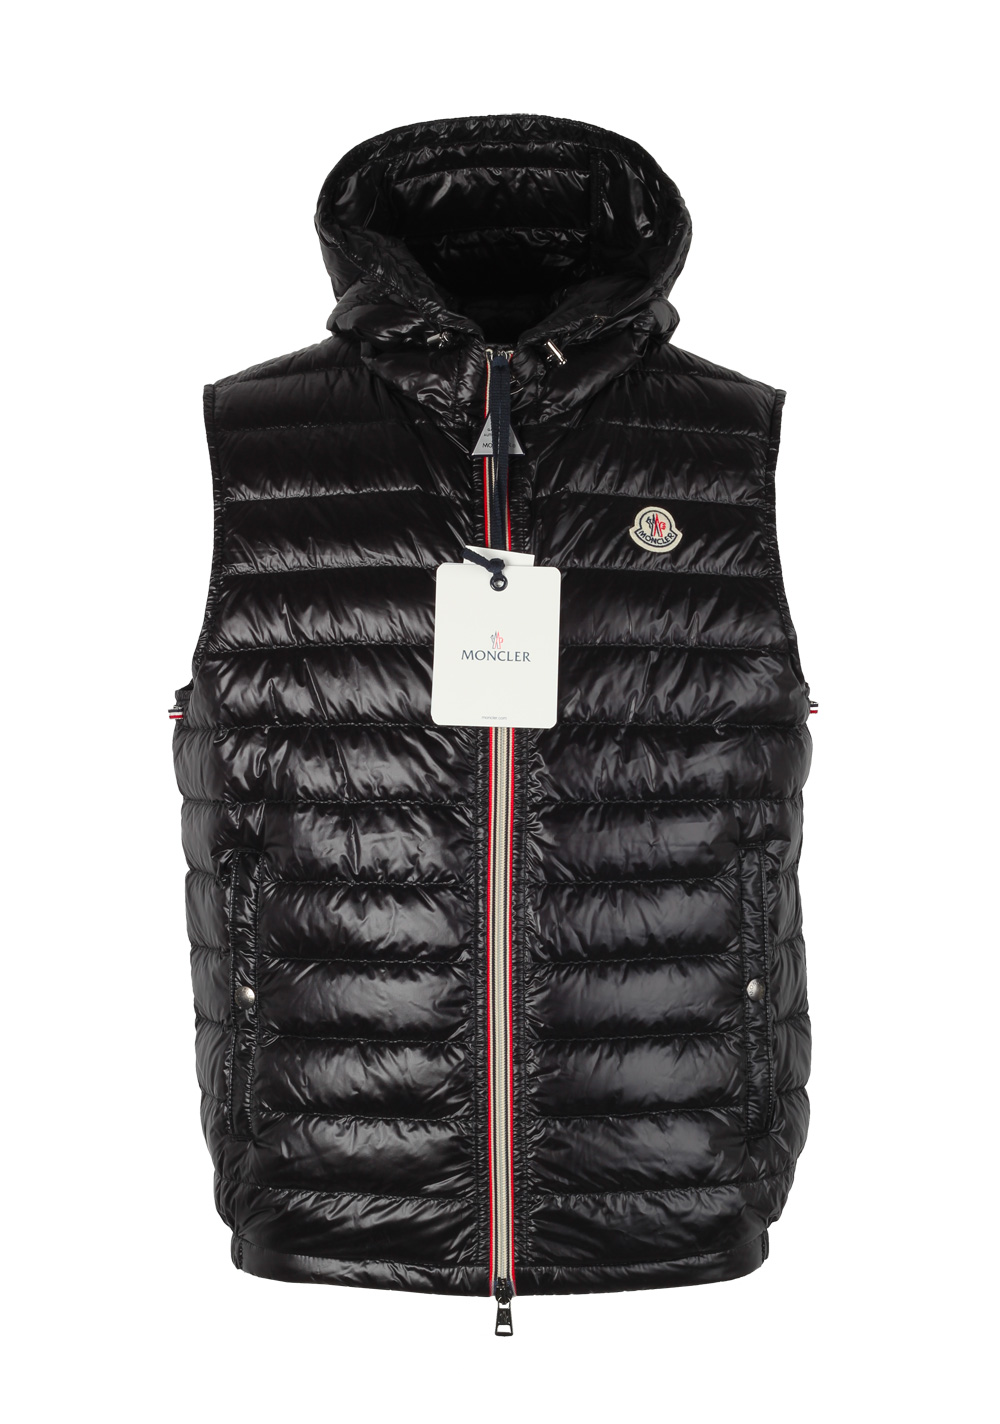 size 2 in moncler